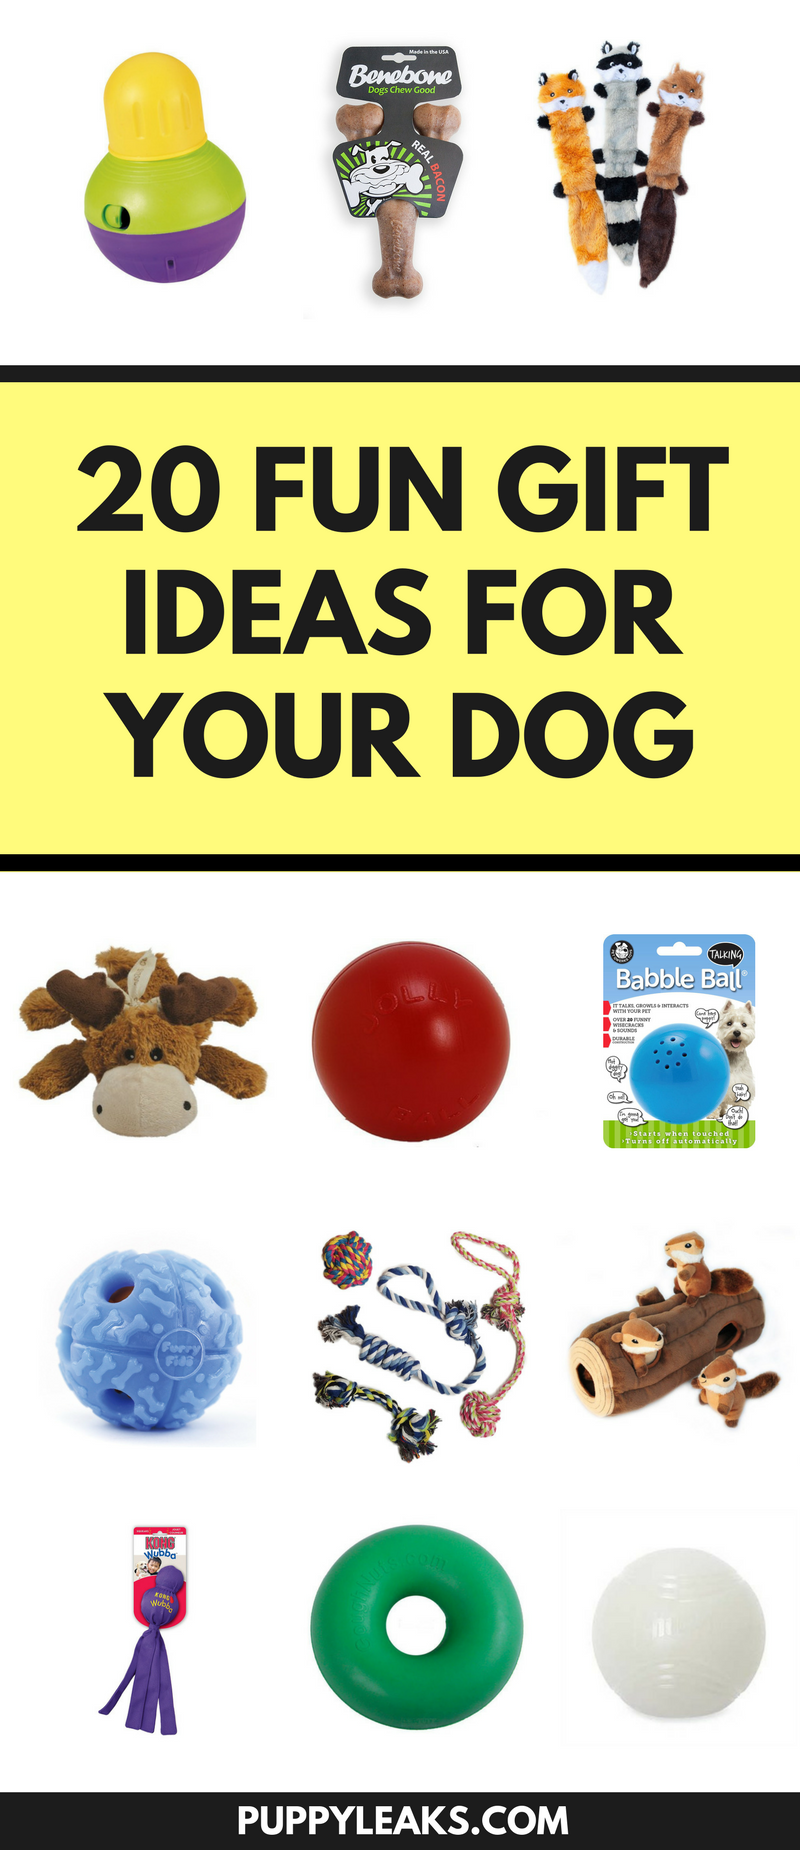 Christmas Gift Guide For Dogs